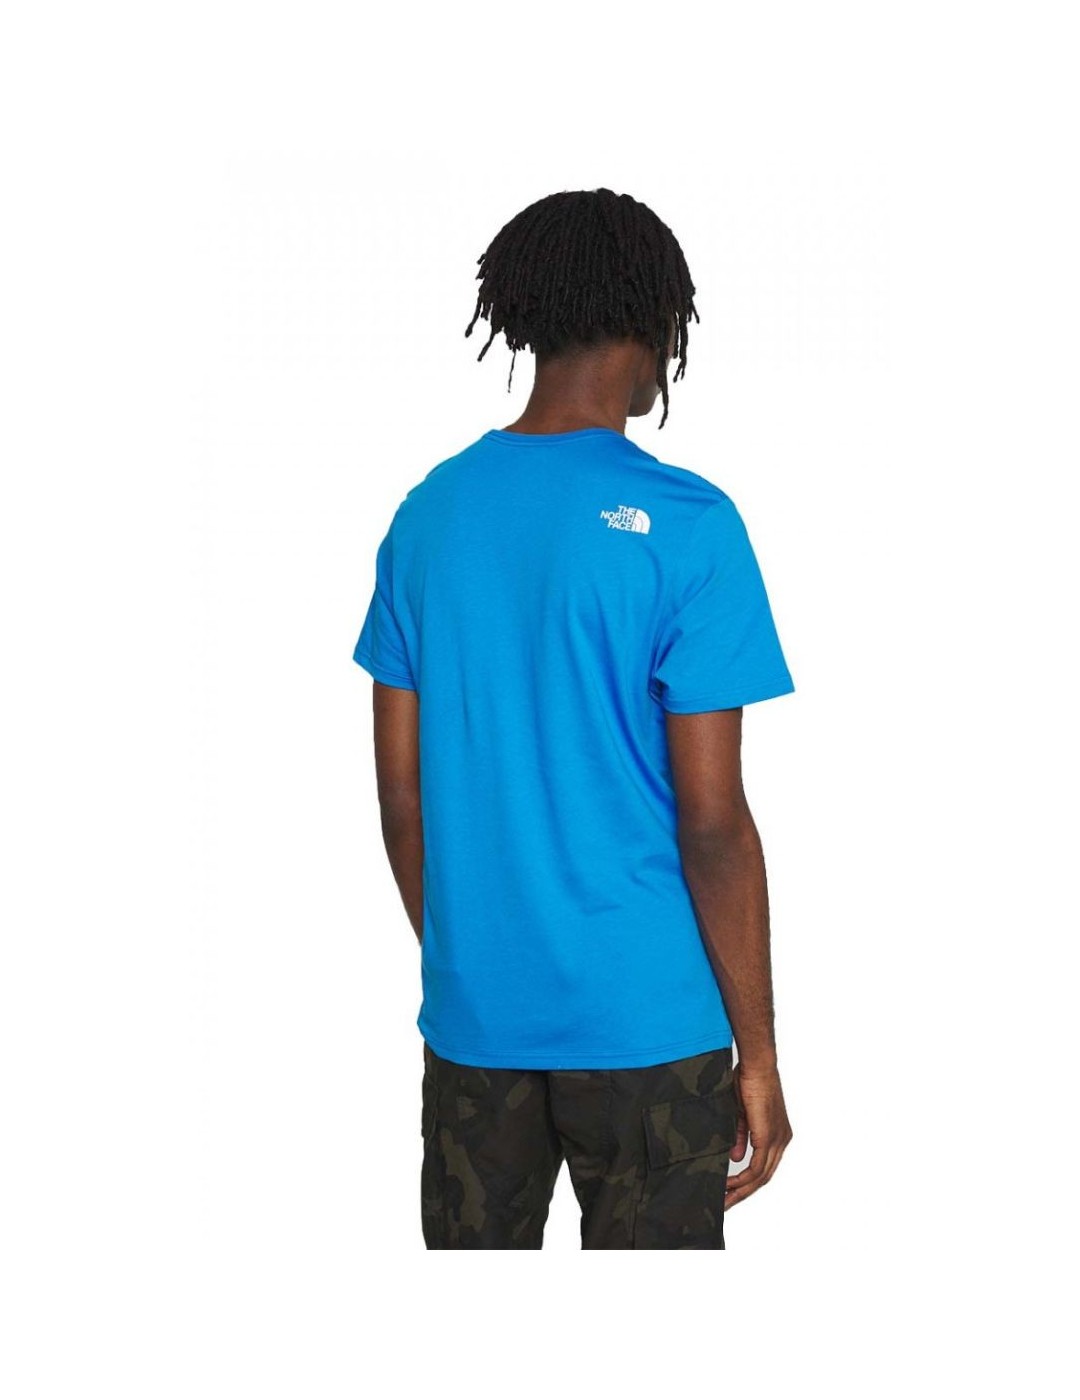 CAMISETA THE NORTH FACE S/S BD GLS TEE CLEAR LAKE BLUE TNF WHITE